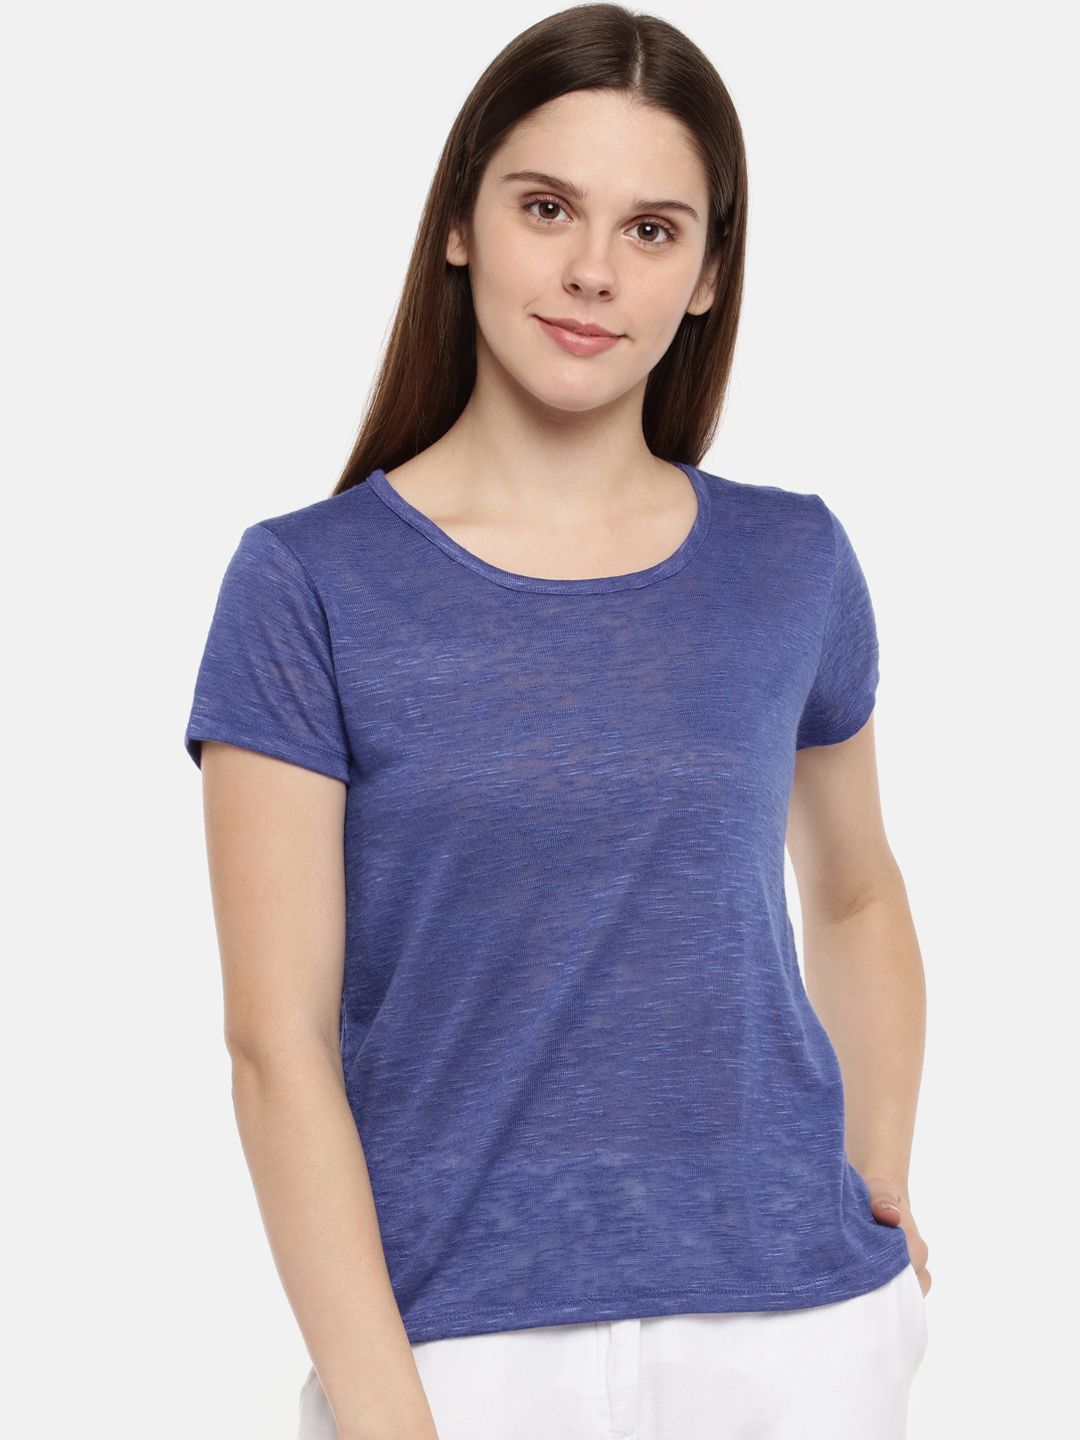 Dreamz by Pantaloons Women Blue Solid Round Neck Lounge T-shirt Price in India